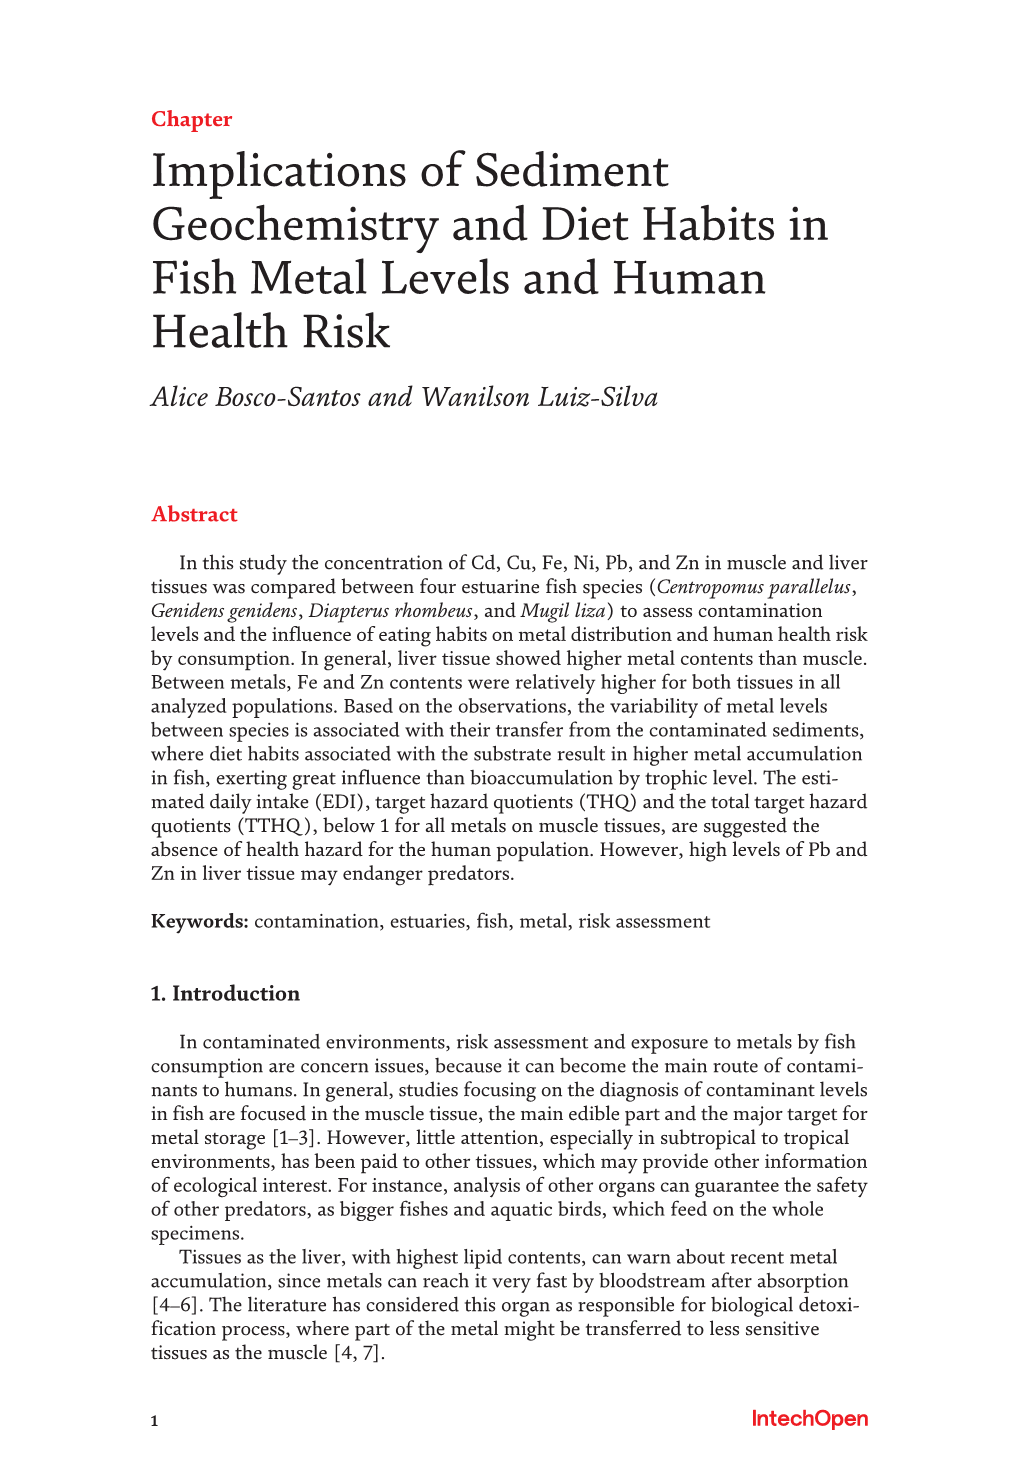 Implications of Sediment Geochemistry and Diet Habits in Fish Metal Levels and Human Health Risk Alice Bosco-Santos and Wanilson Luiz-Silva